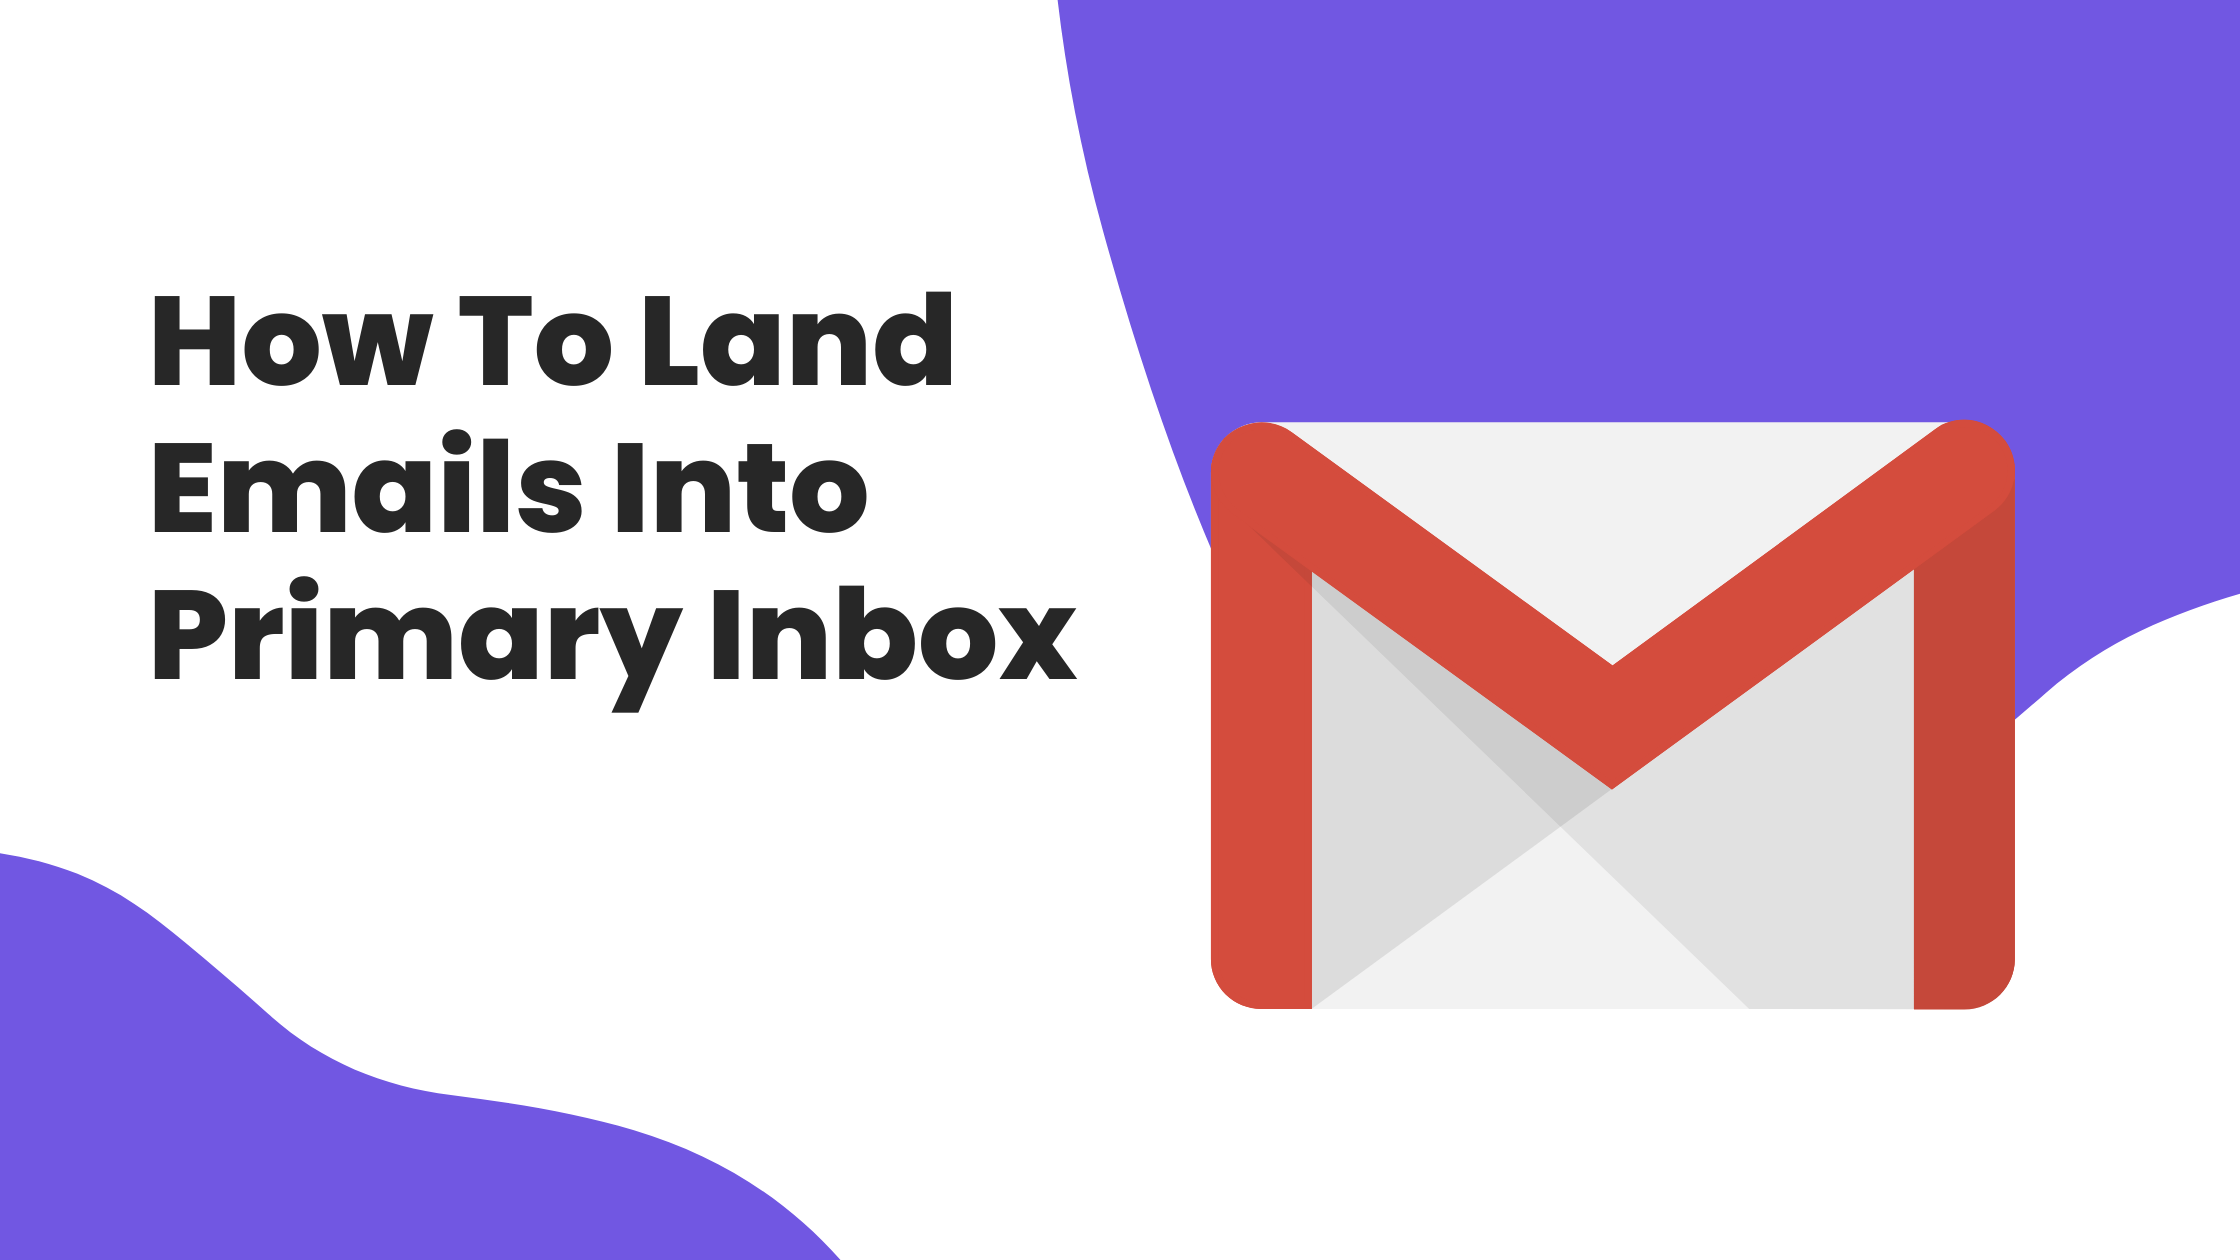 How To Land Emails Into Primary Inbox